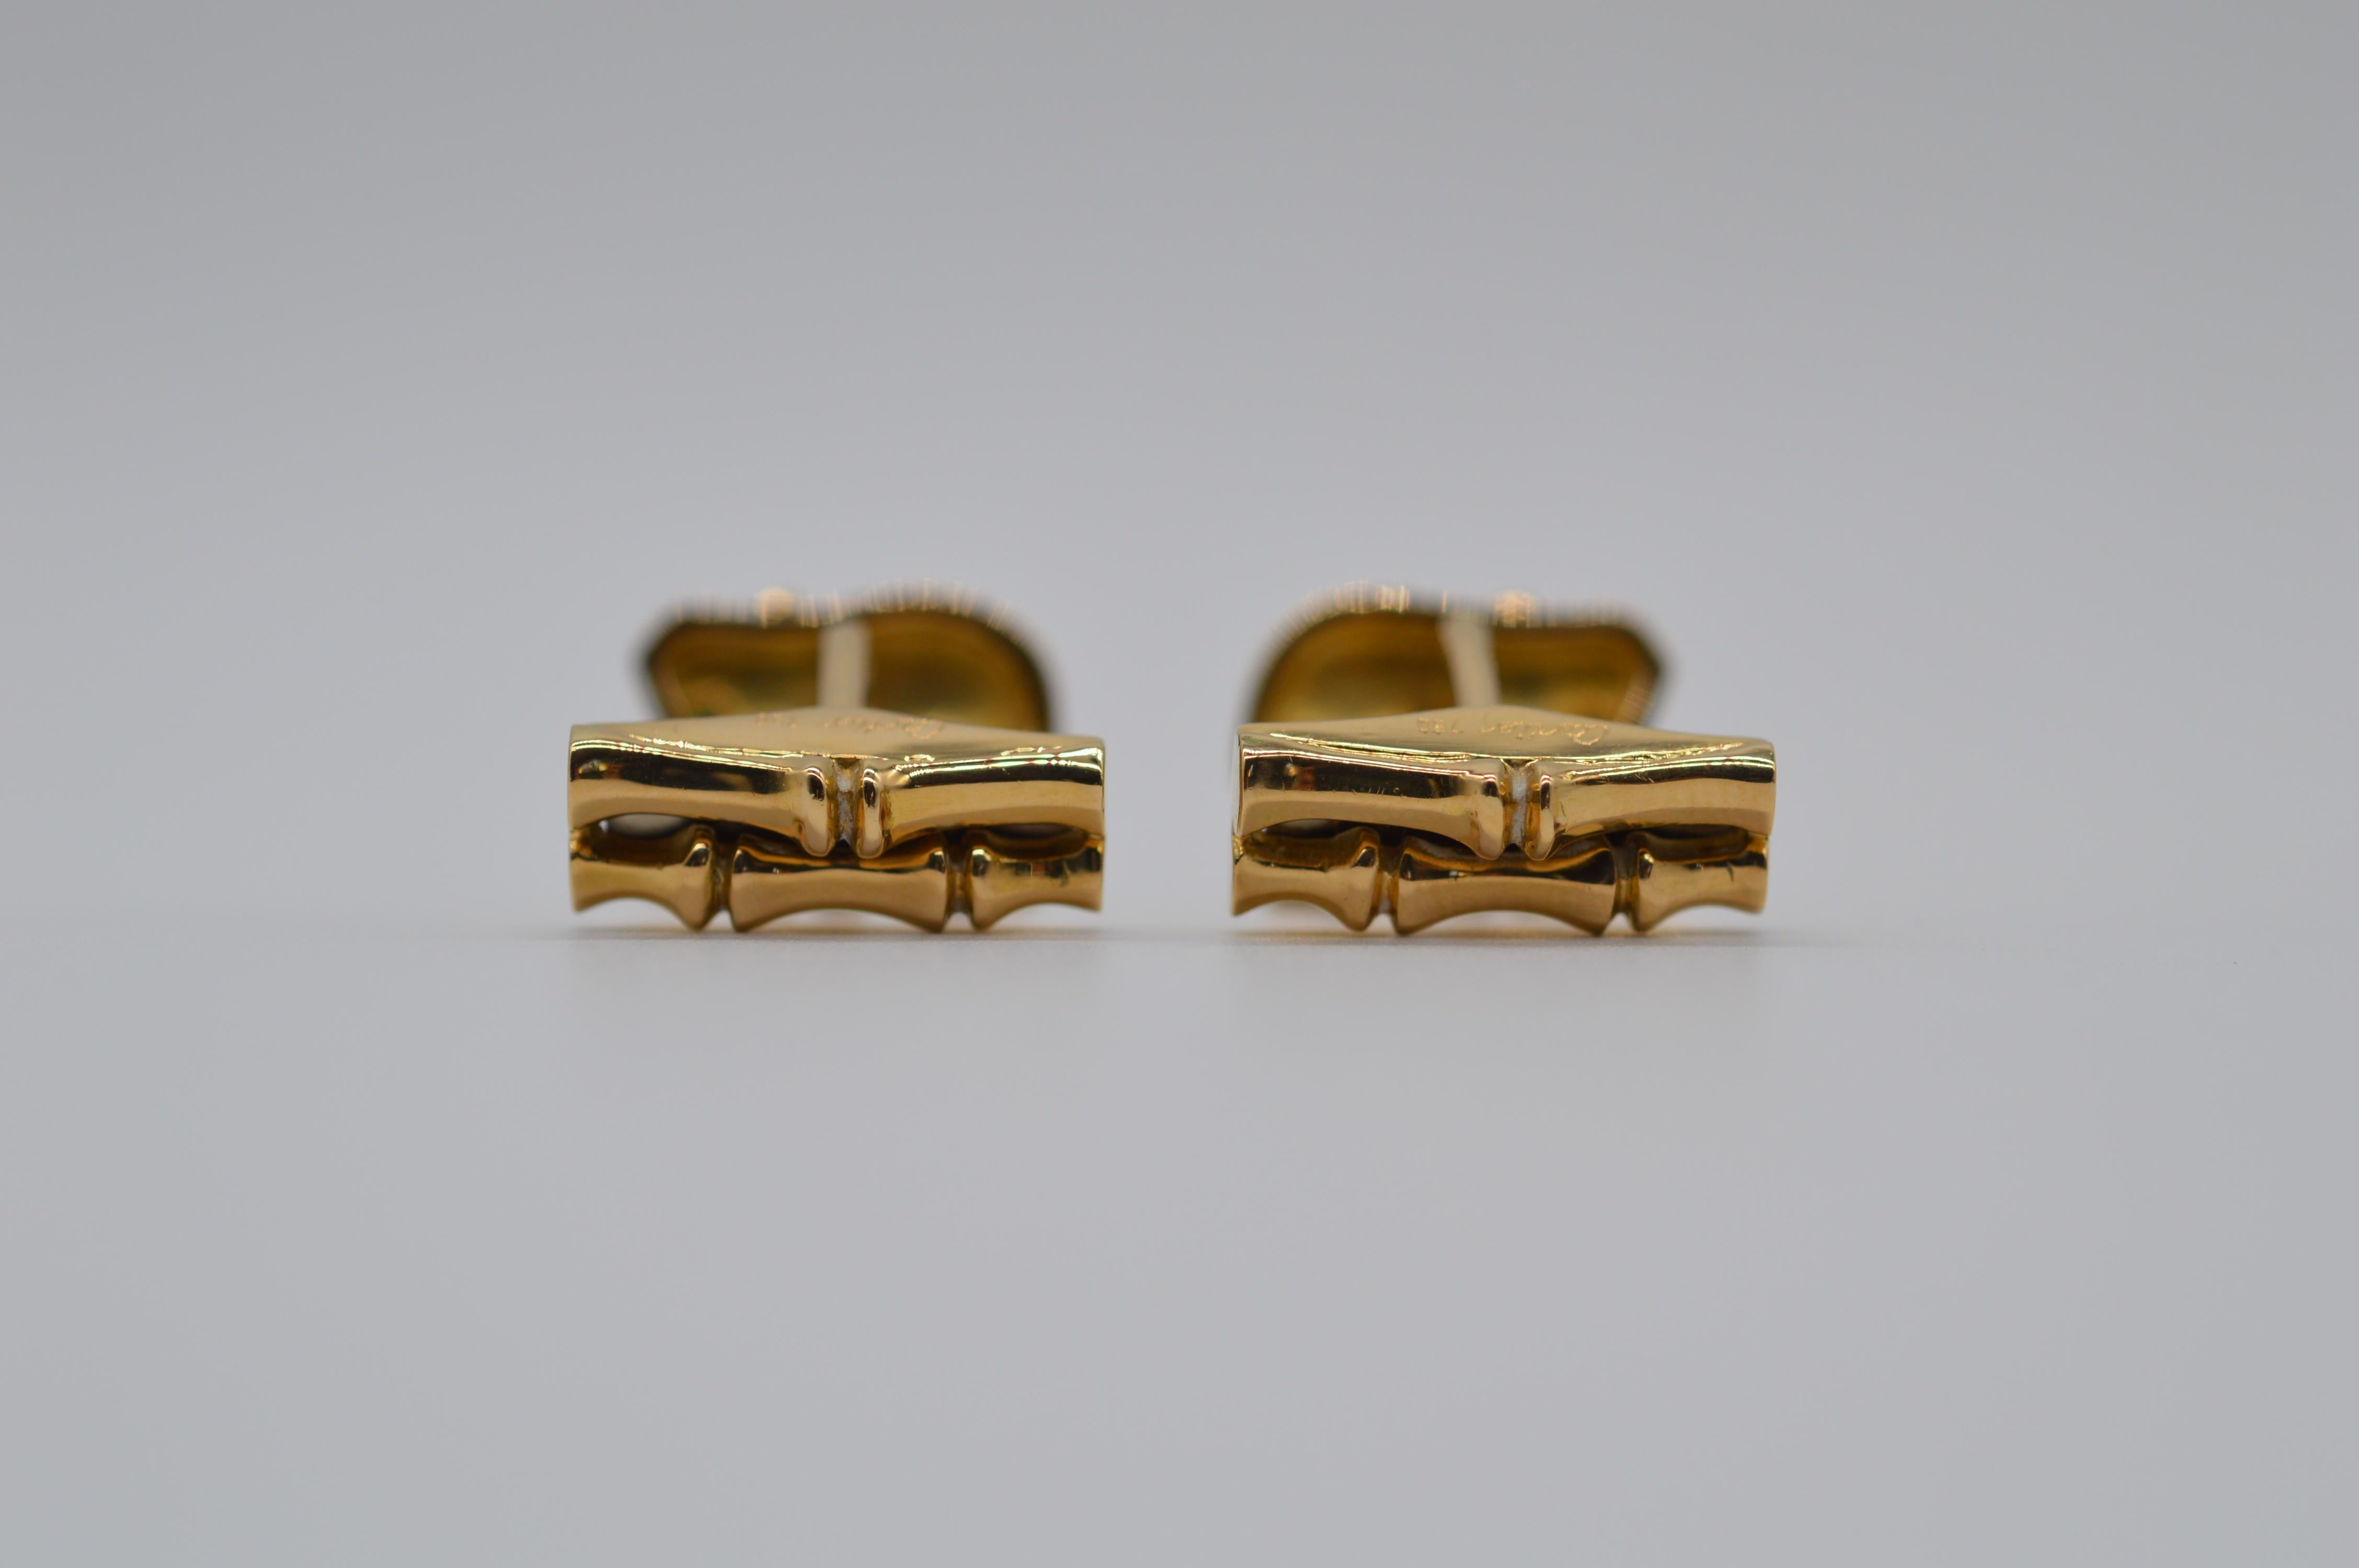 Cartier Elephant Cufflink
18K Yellow Gold
Weight 13.7 grams
Emerald Eyes
Vintage unworn condition
With original certificate from Cartier
From 1999